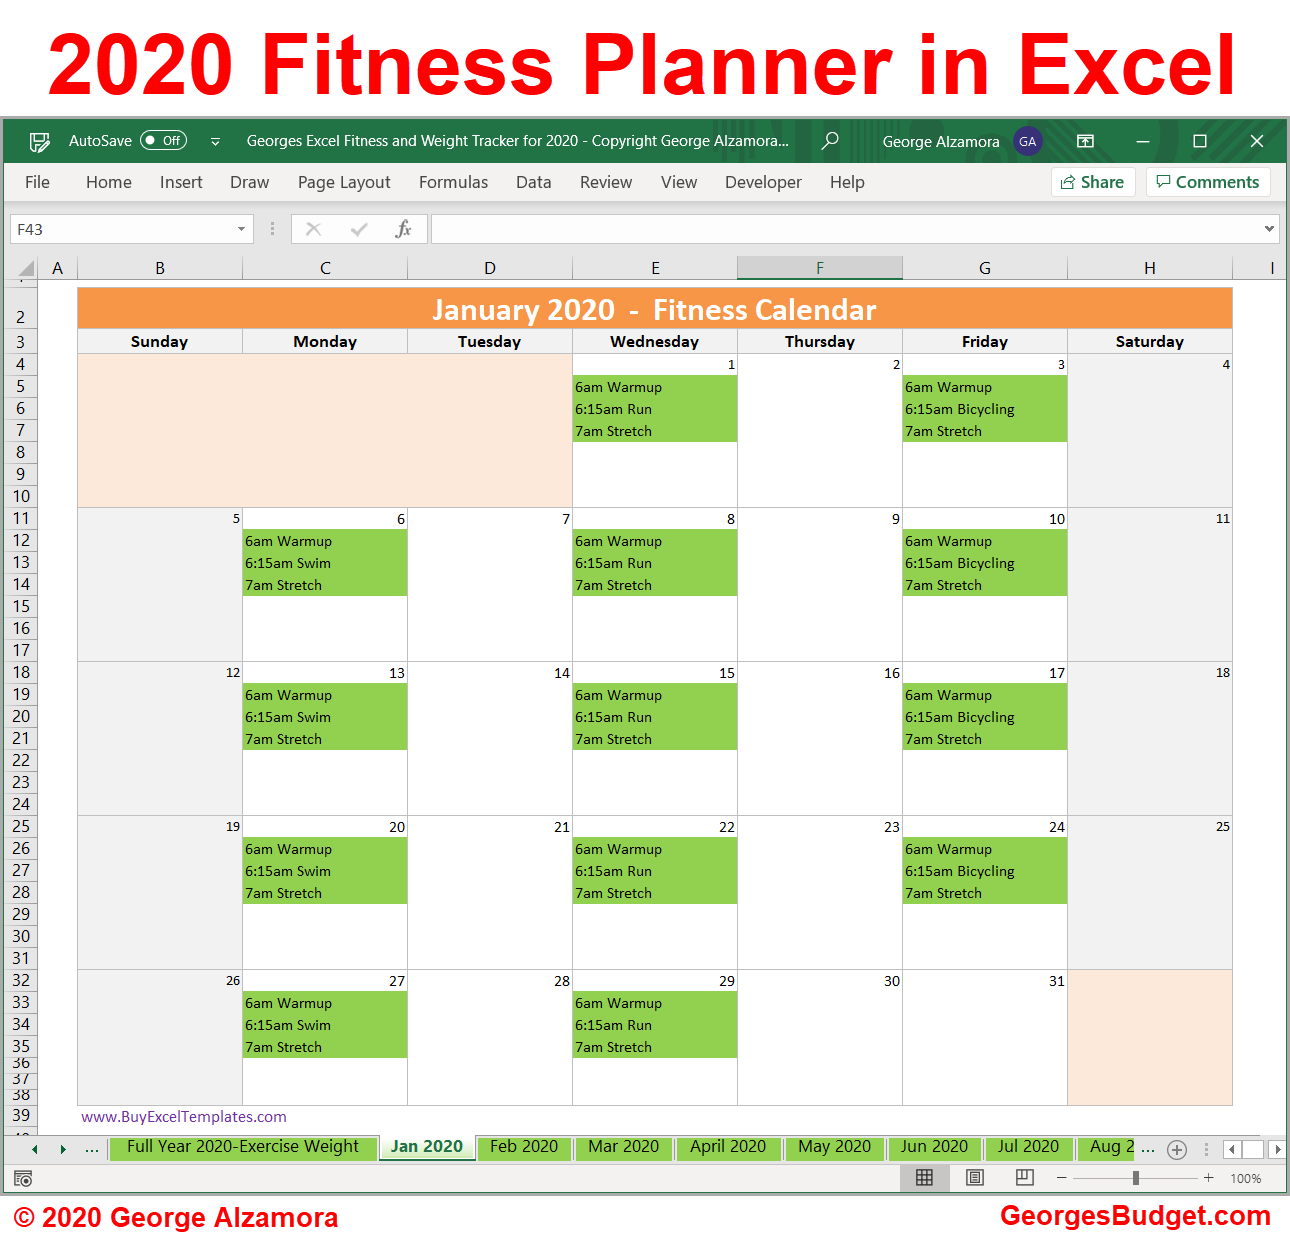 Year 2020 workout routine planner in Excel